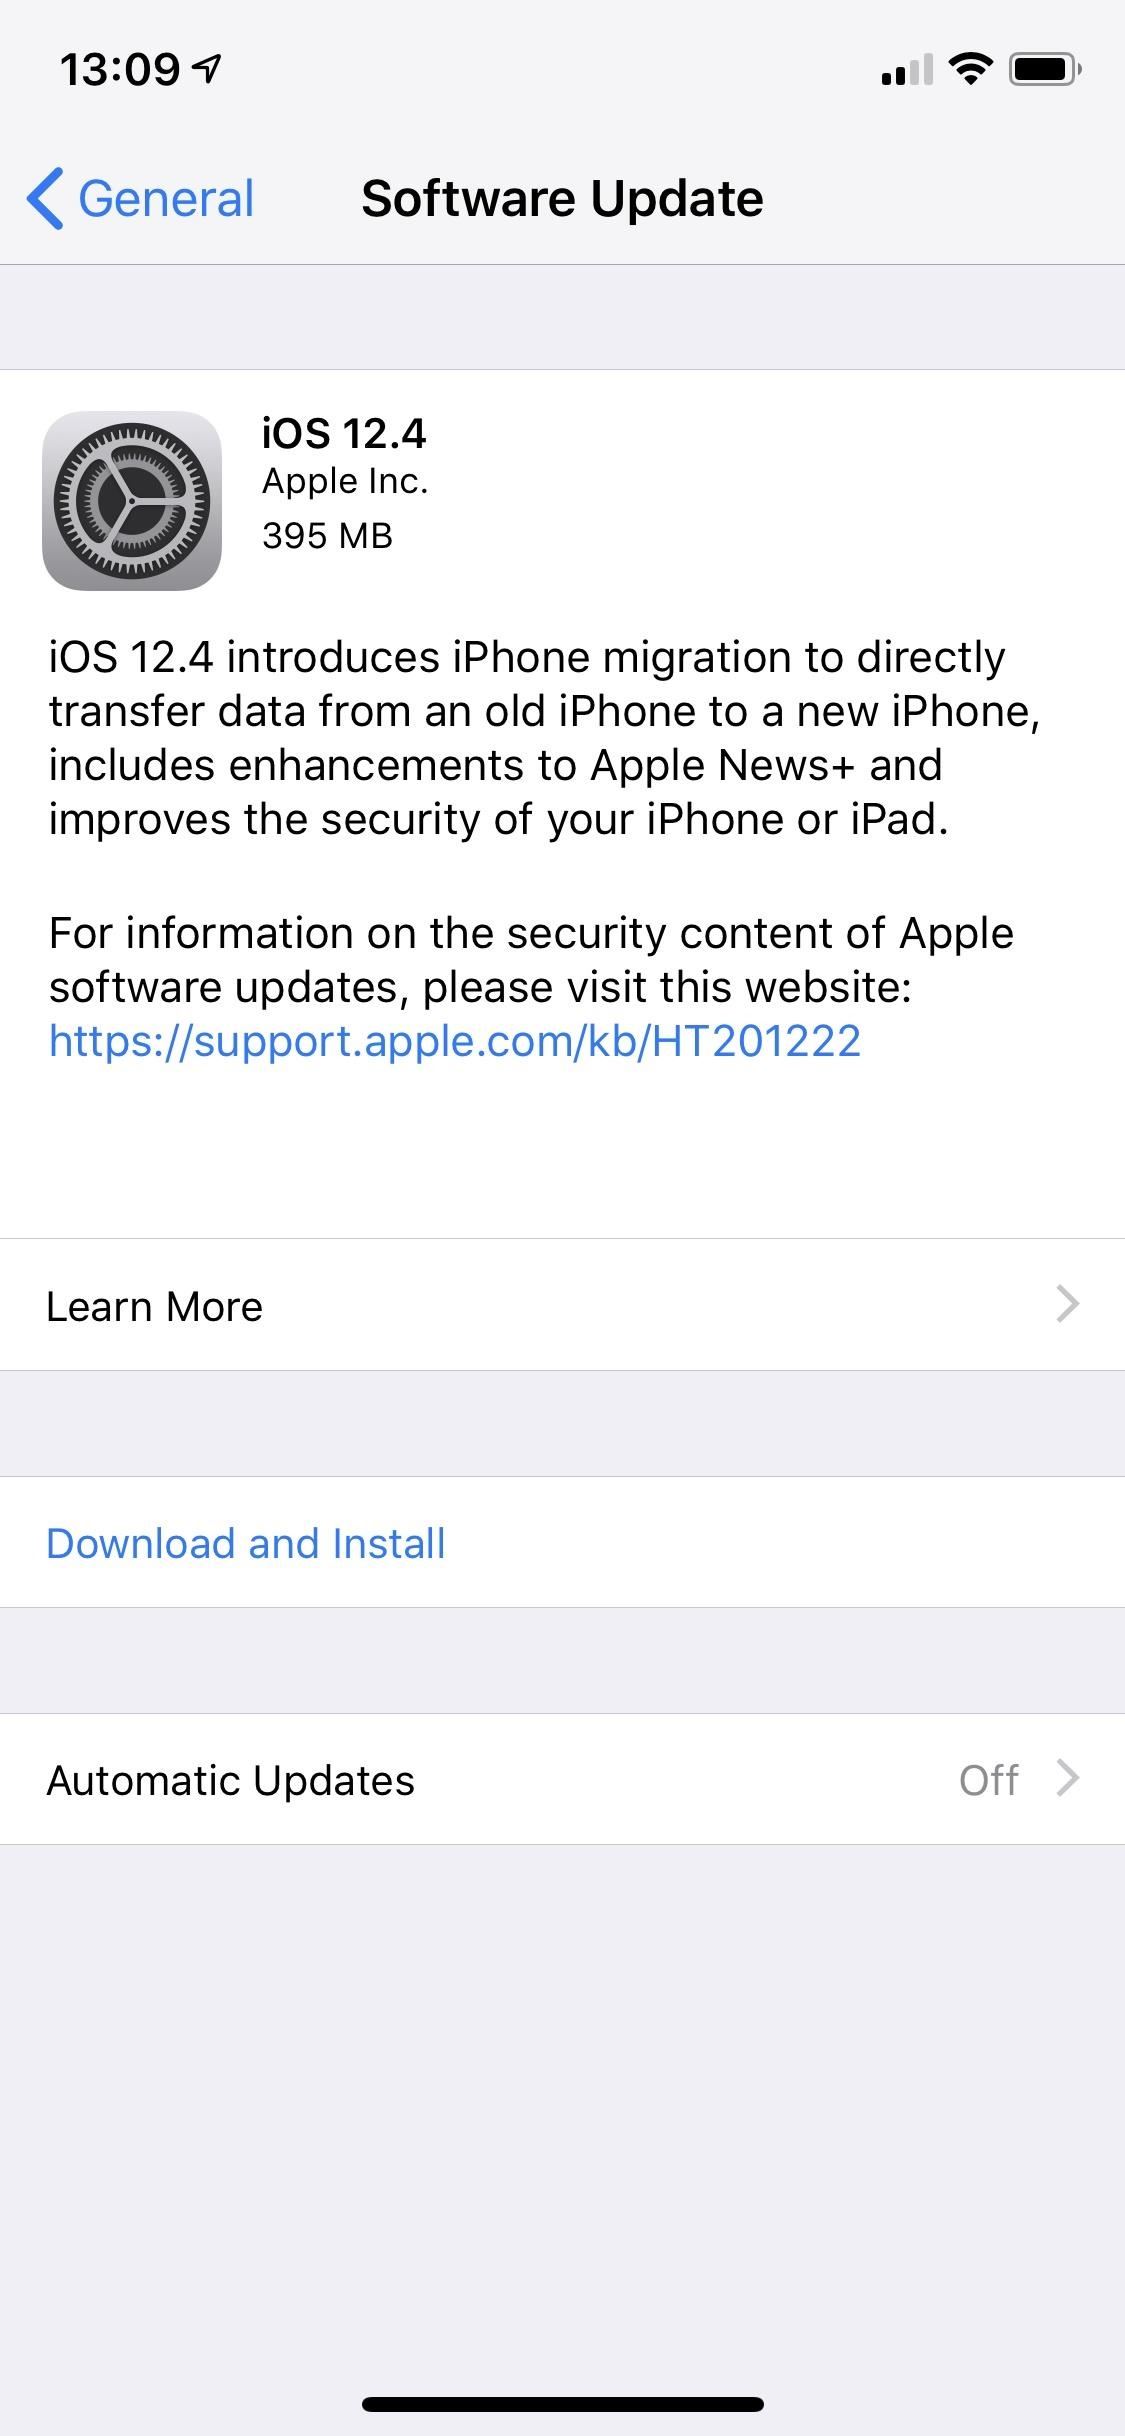 Apple Releases iOS 12.4 for iPhone with Migration Tool, Apple News+ Improvements & More